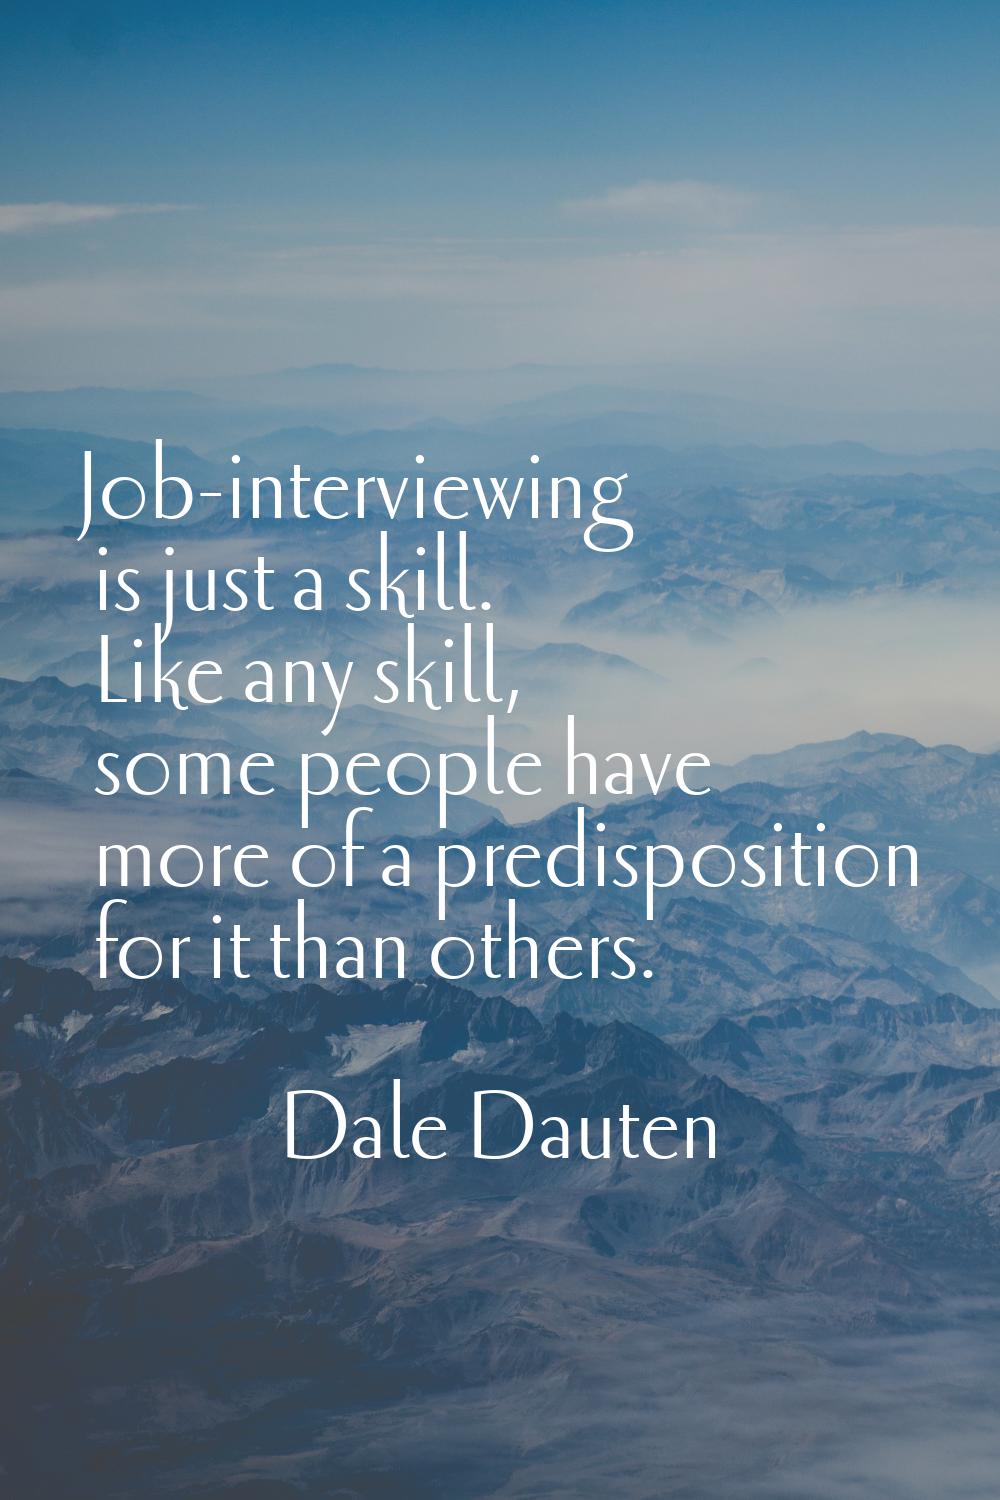 Job-interviewing is just a skill. Like any skill, some people have more of a predisposition for it 